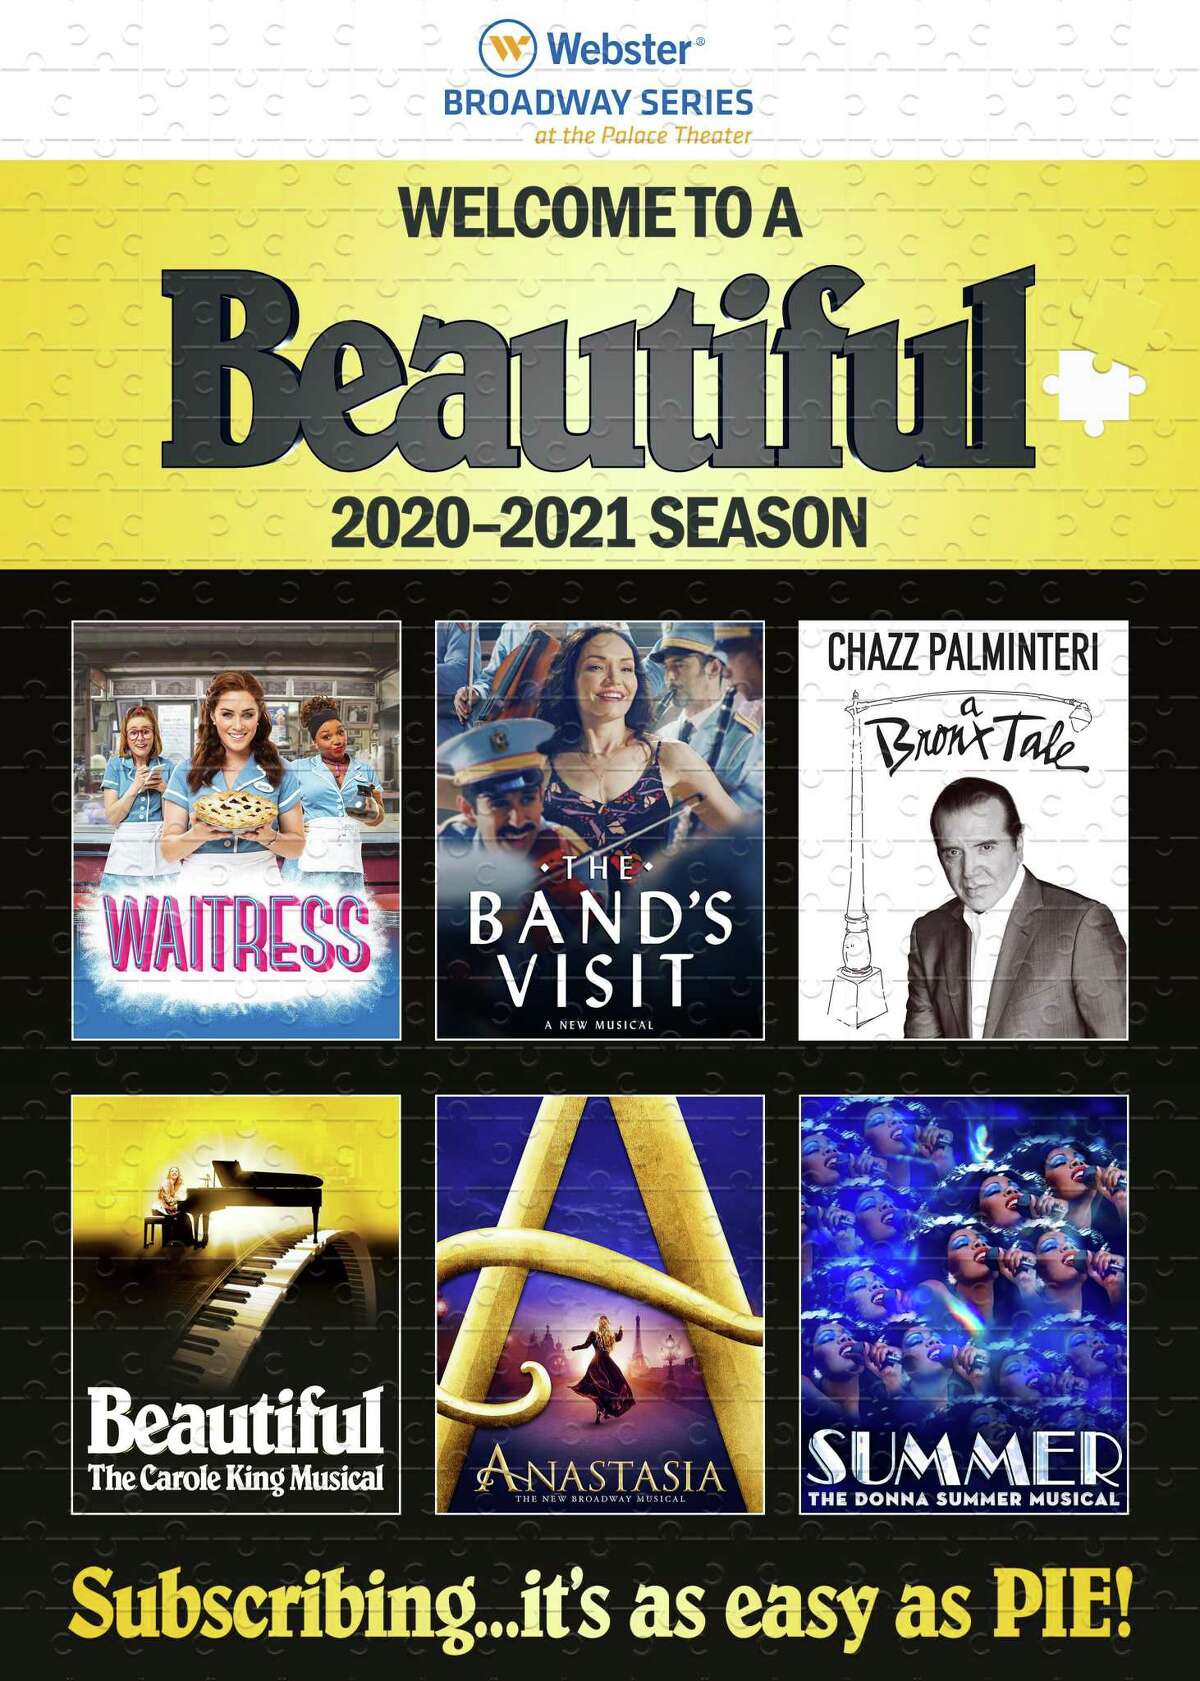 The Palace Theater is selling tickets for its 2020-21 subscription series.